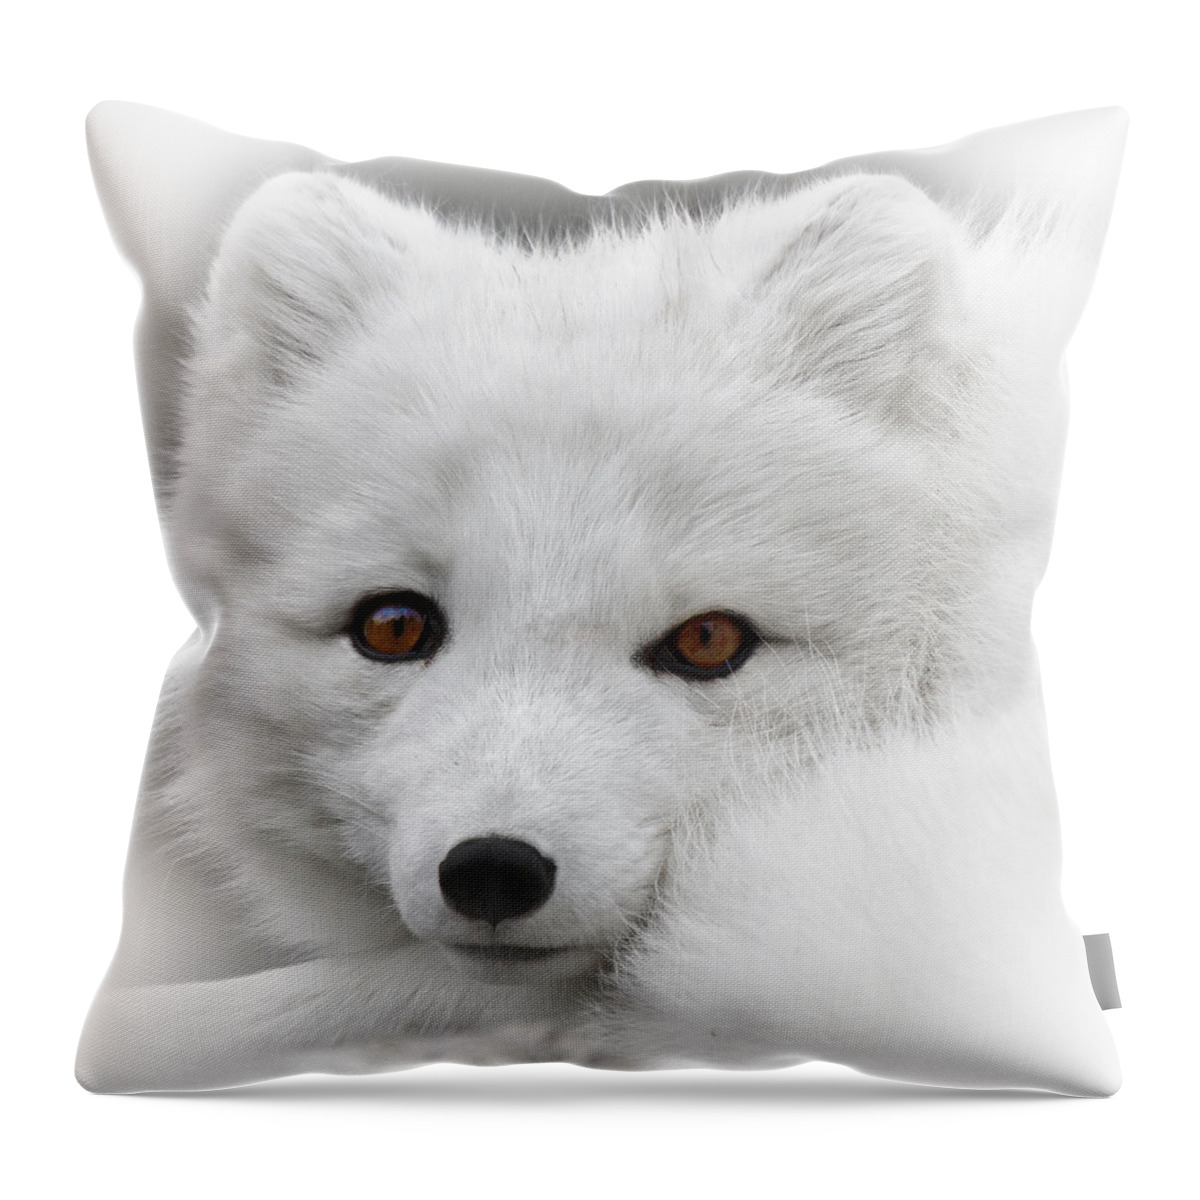 Another Oh Those Eyes Throw Pillow featuring the photograph Another Oh Those Eyes by Wes and Dotty Weber